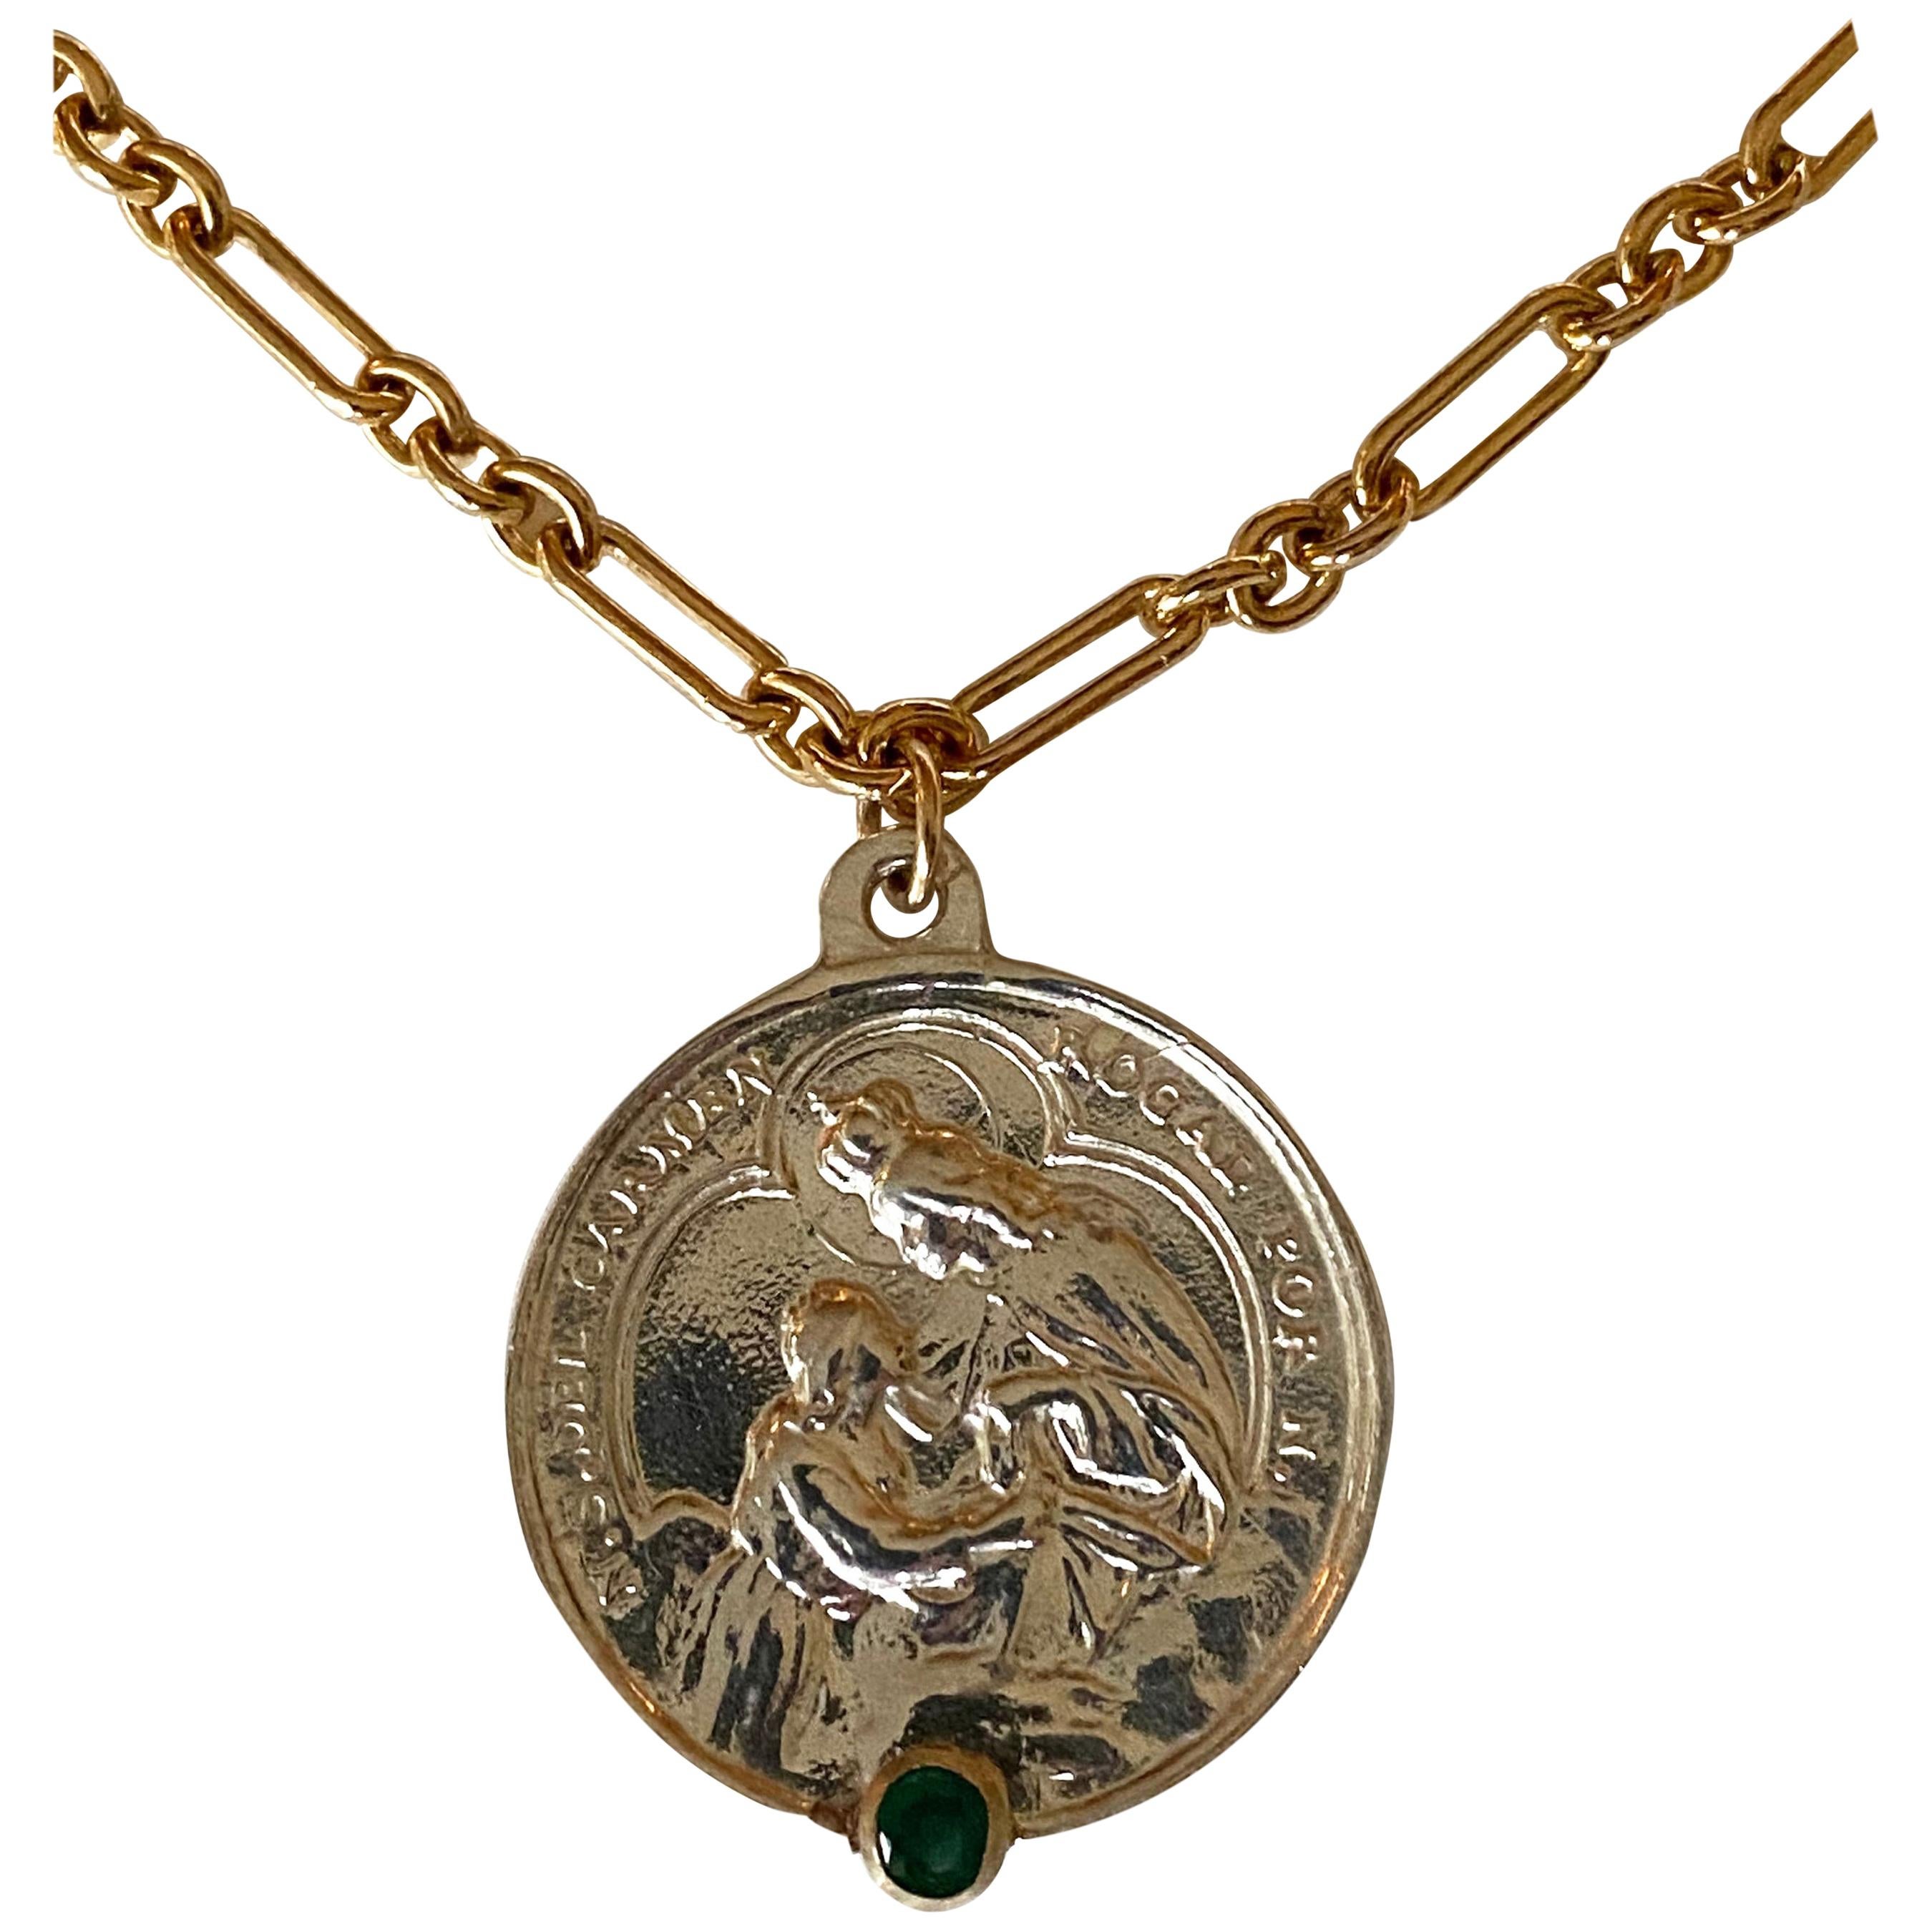 Emerald Sacred Medal Necklace Chunky Chain Pendant J Dauphin For Sale